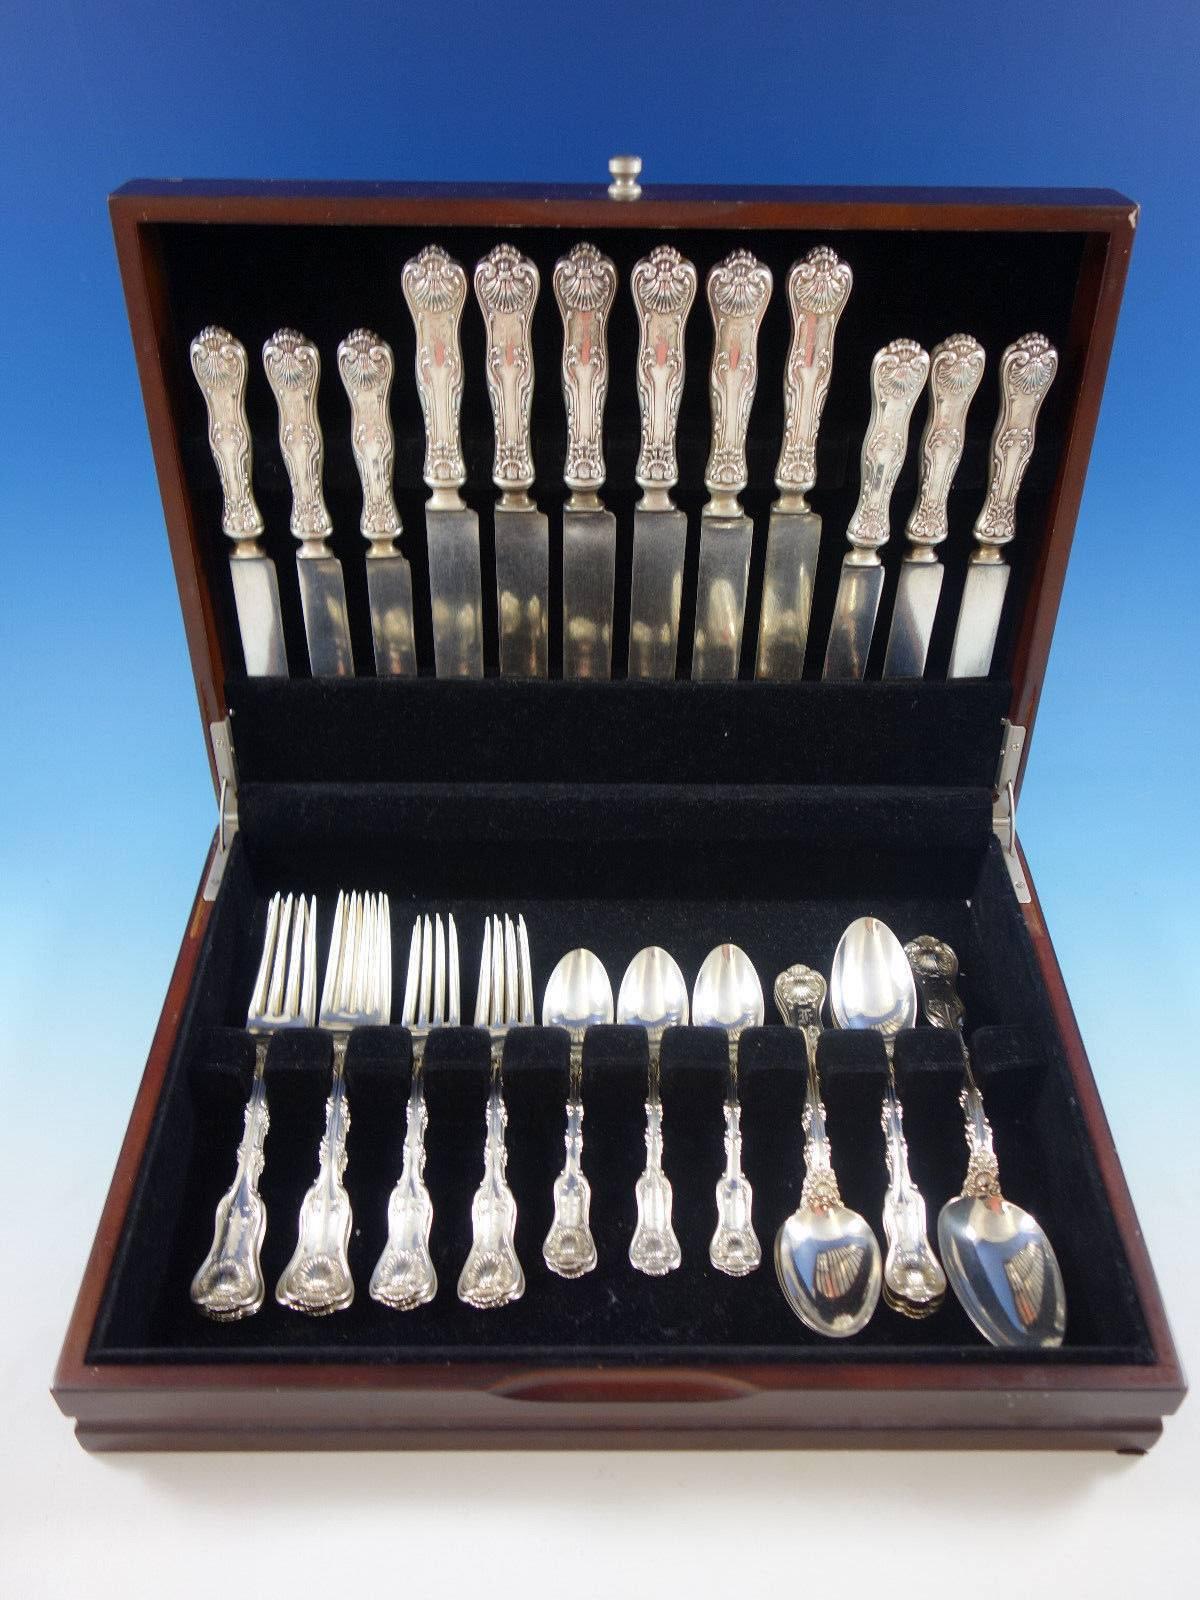 Imperial Queen by Whiting sterling silver flatware set, 38 pieces. Great starter set! This set includes: 

six dinner size knives, 9 1/2